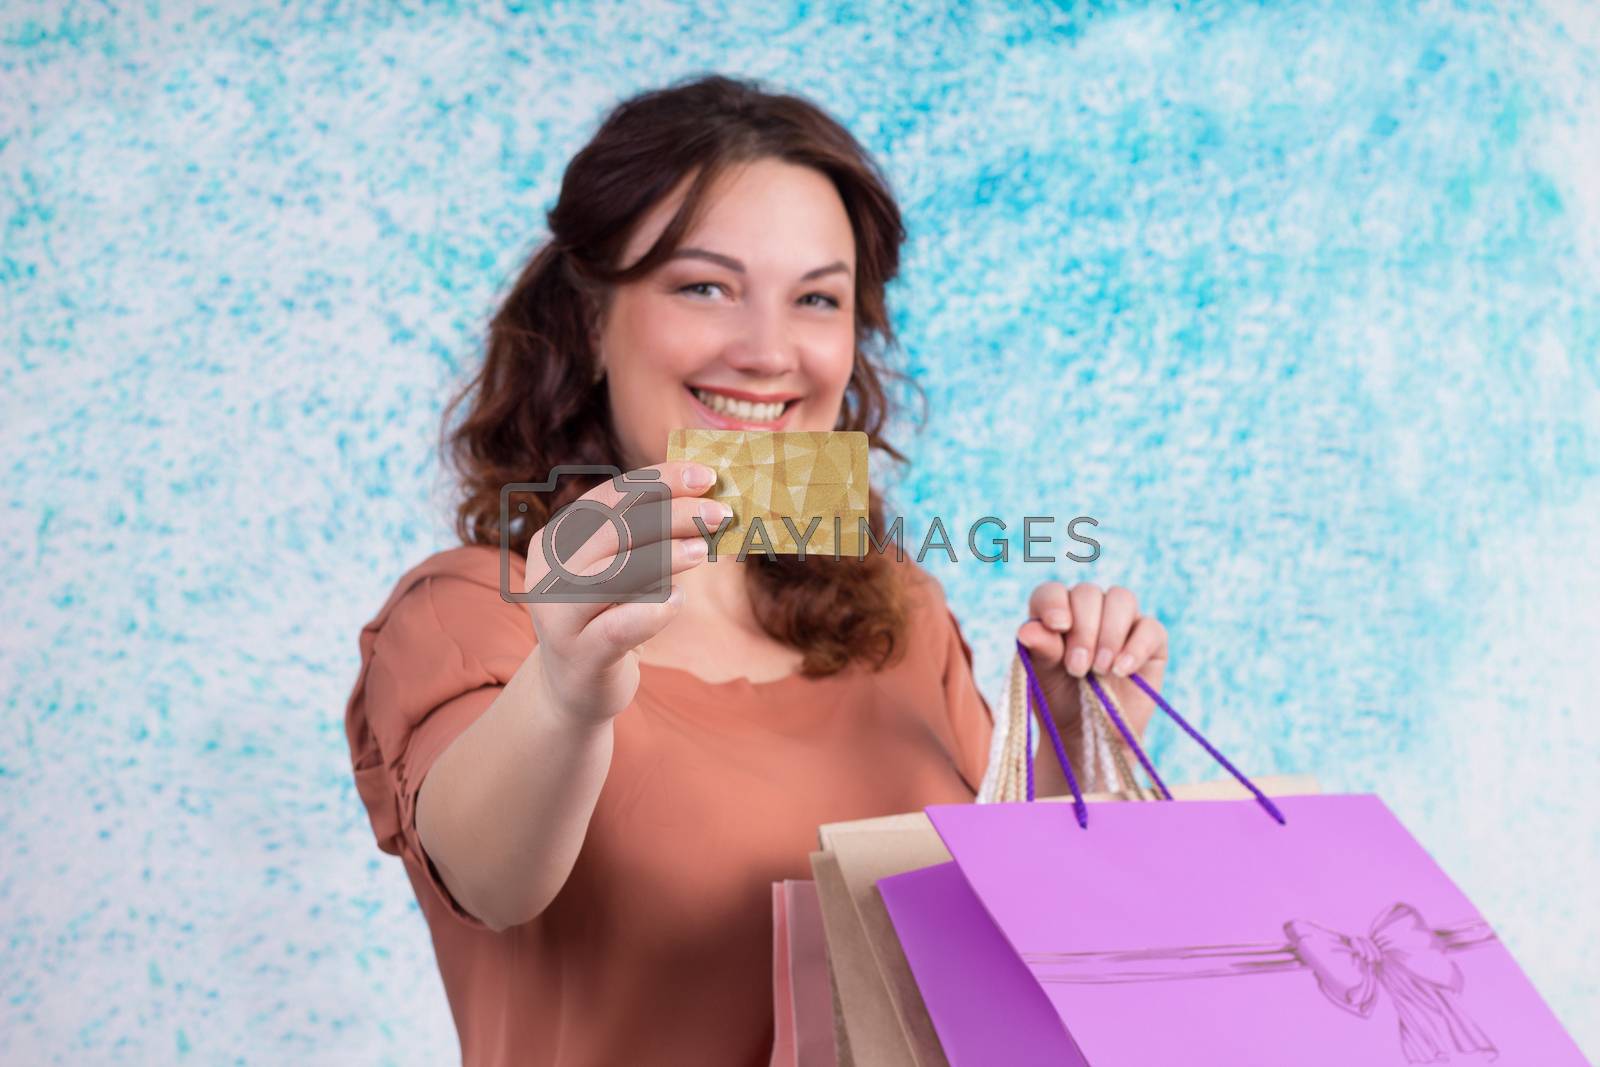 Royalty free image of Smiling woman with colourful shopping paper bags shows credit ca by VeraVerano